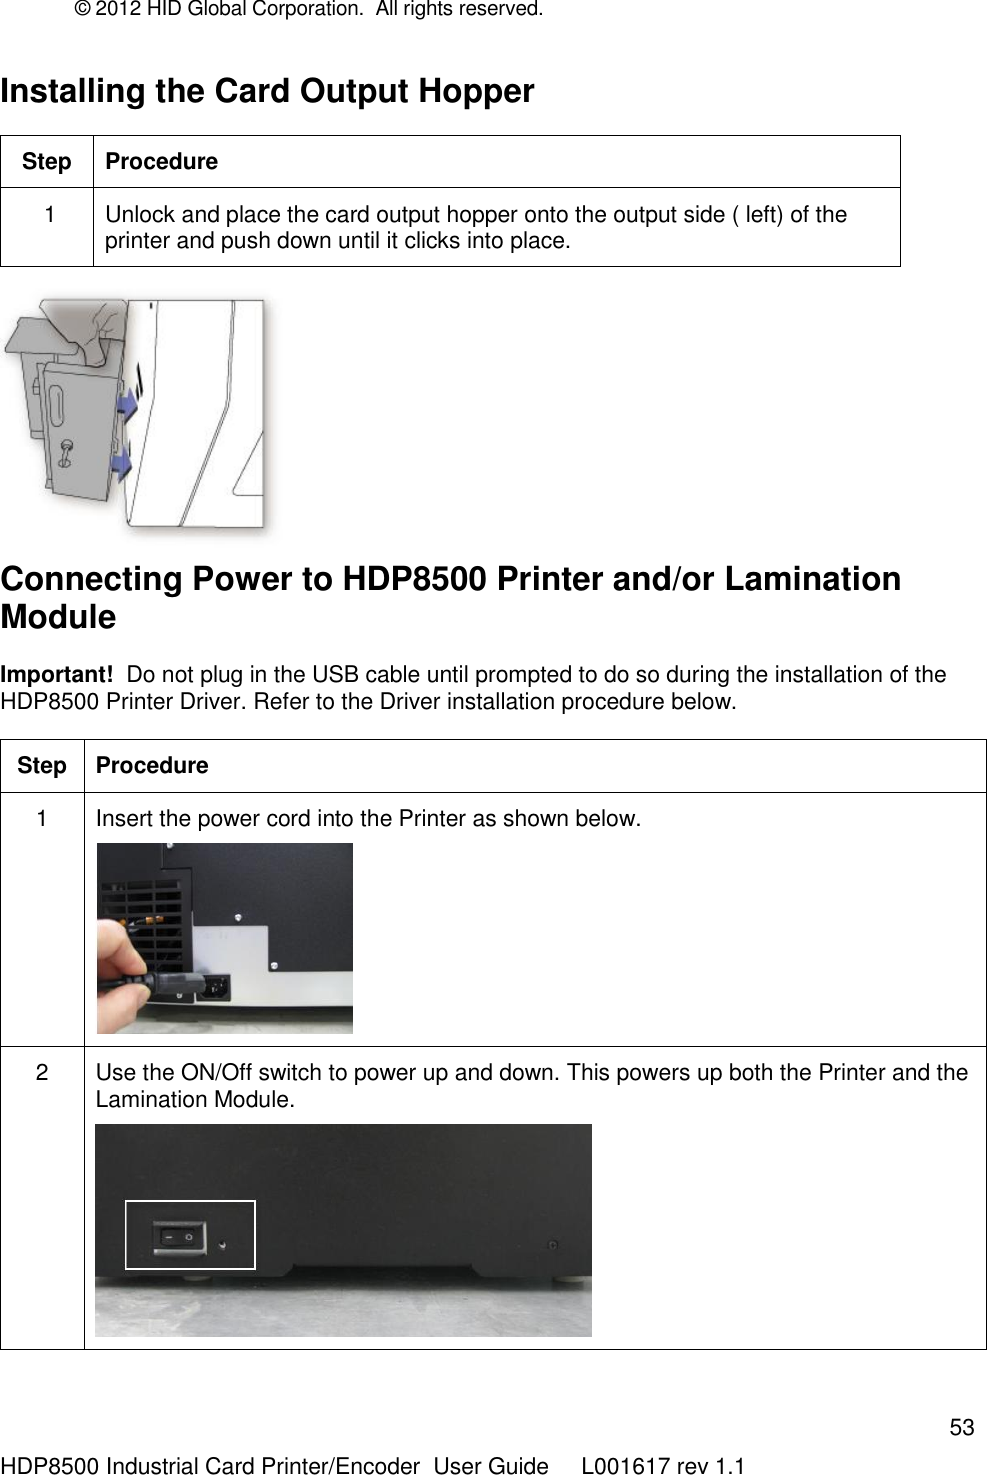 © 2012 HID Global Corporation.  All rights reserved.  53 HDP8500 Industrial Card Printer/Encoder  User Guide     L001617 rev 1.1 Installing the Card Output Hopper Step Procedure  1 Unlock and place the card output hopper onto the output side ( left) of the printer and push down until it clicks into place.     Connecting Power to HDP8500 Printer and/or Lamination Module    Important!  Do not plug in the USB cable until prompted to do so during the installation of the HDP8500 Printer Driver. Refer to the Driver installation procedure below. Step Procedure 1 Insert the power cord into the Printer as shown below.   2 Use the ON/Off switch to power up and down. This powers up both the Printer and the Lamination Module.   